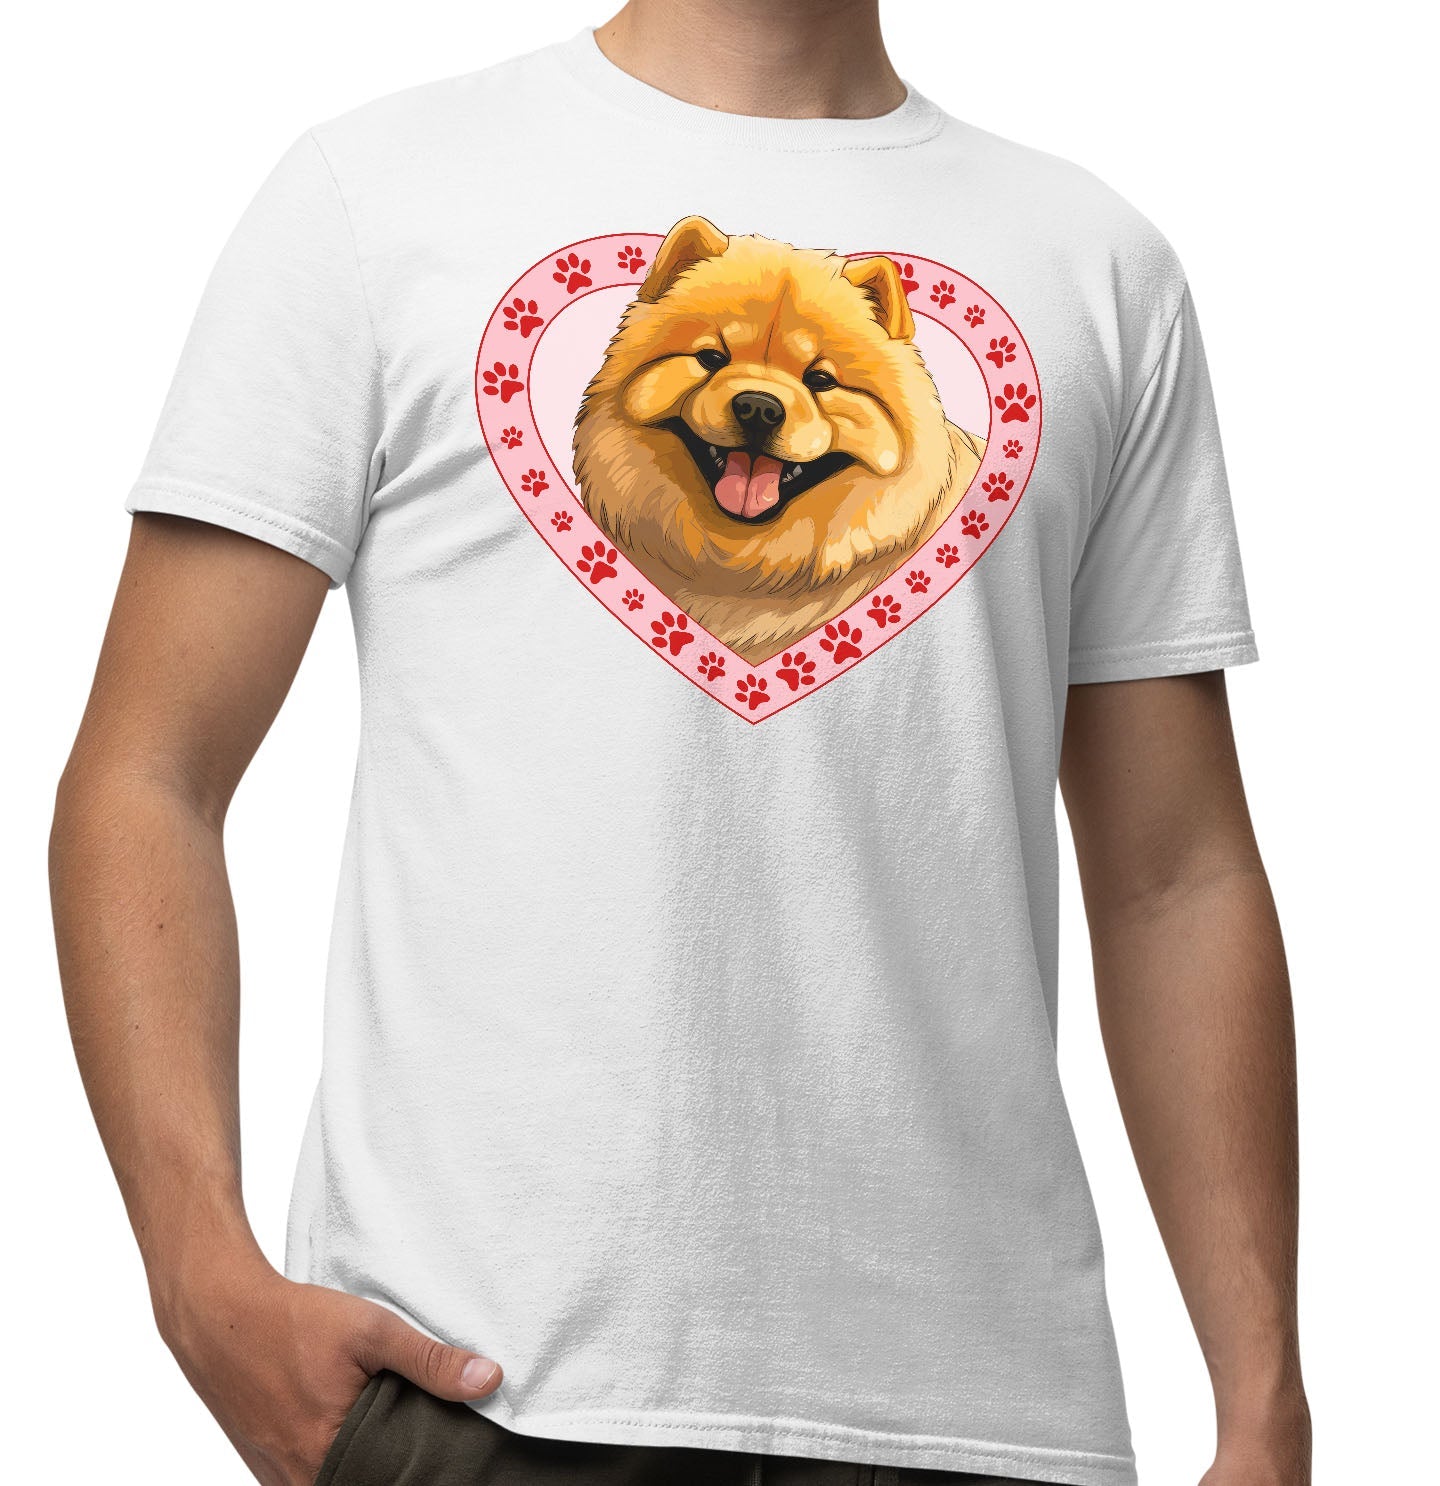 Chow Chow Illustration In Heart - Adult Unisex T-Shirt